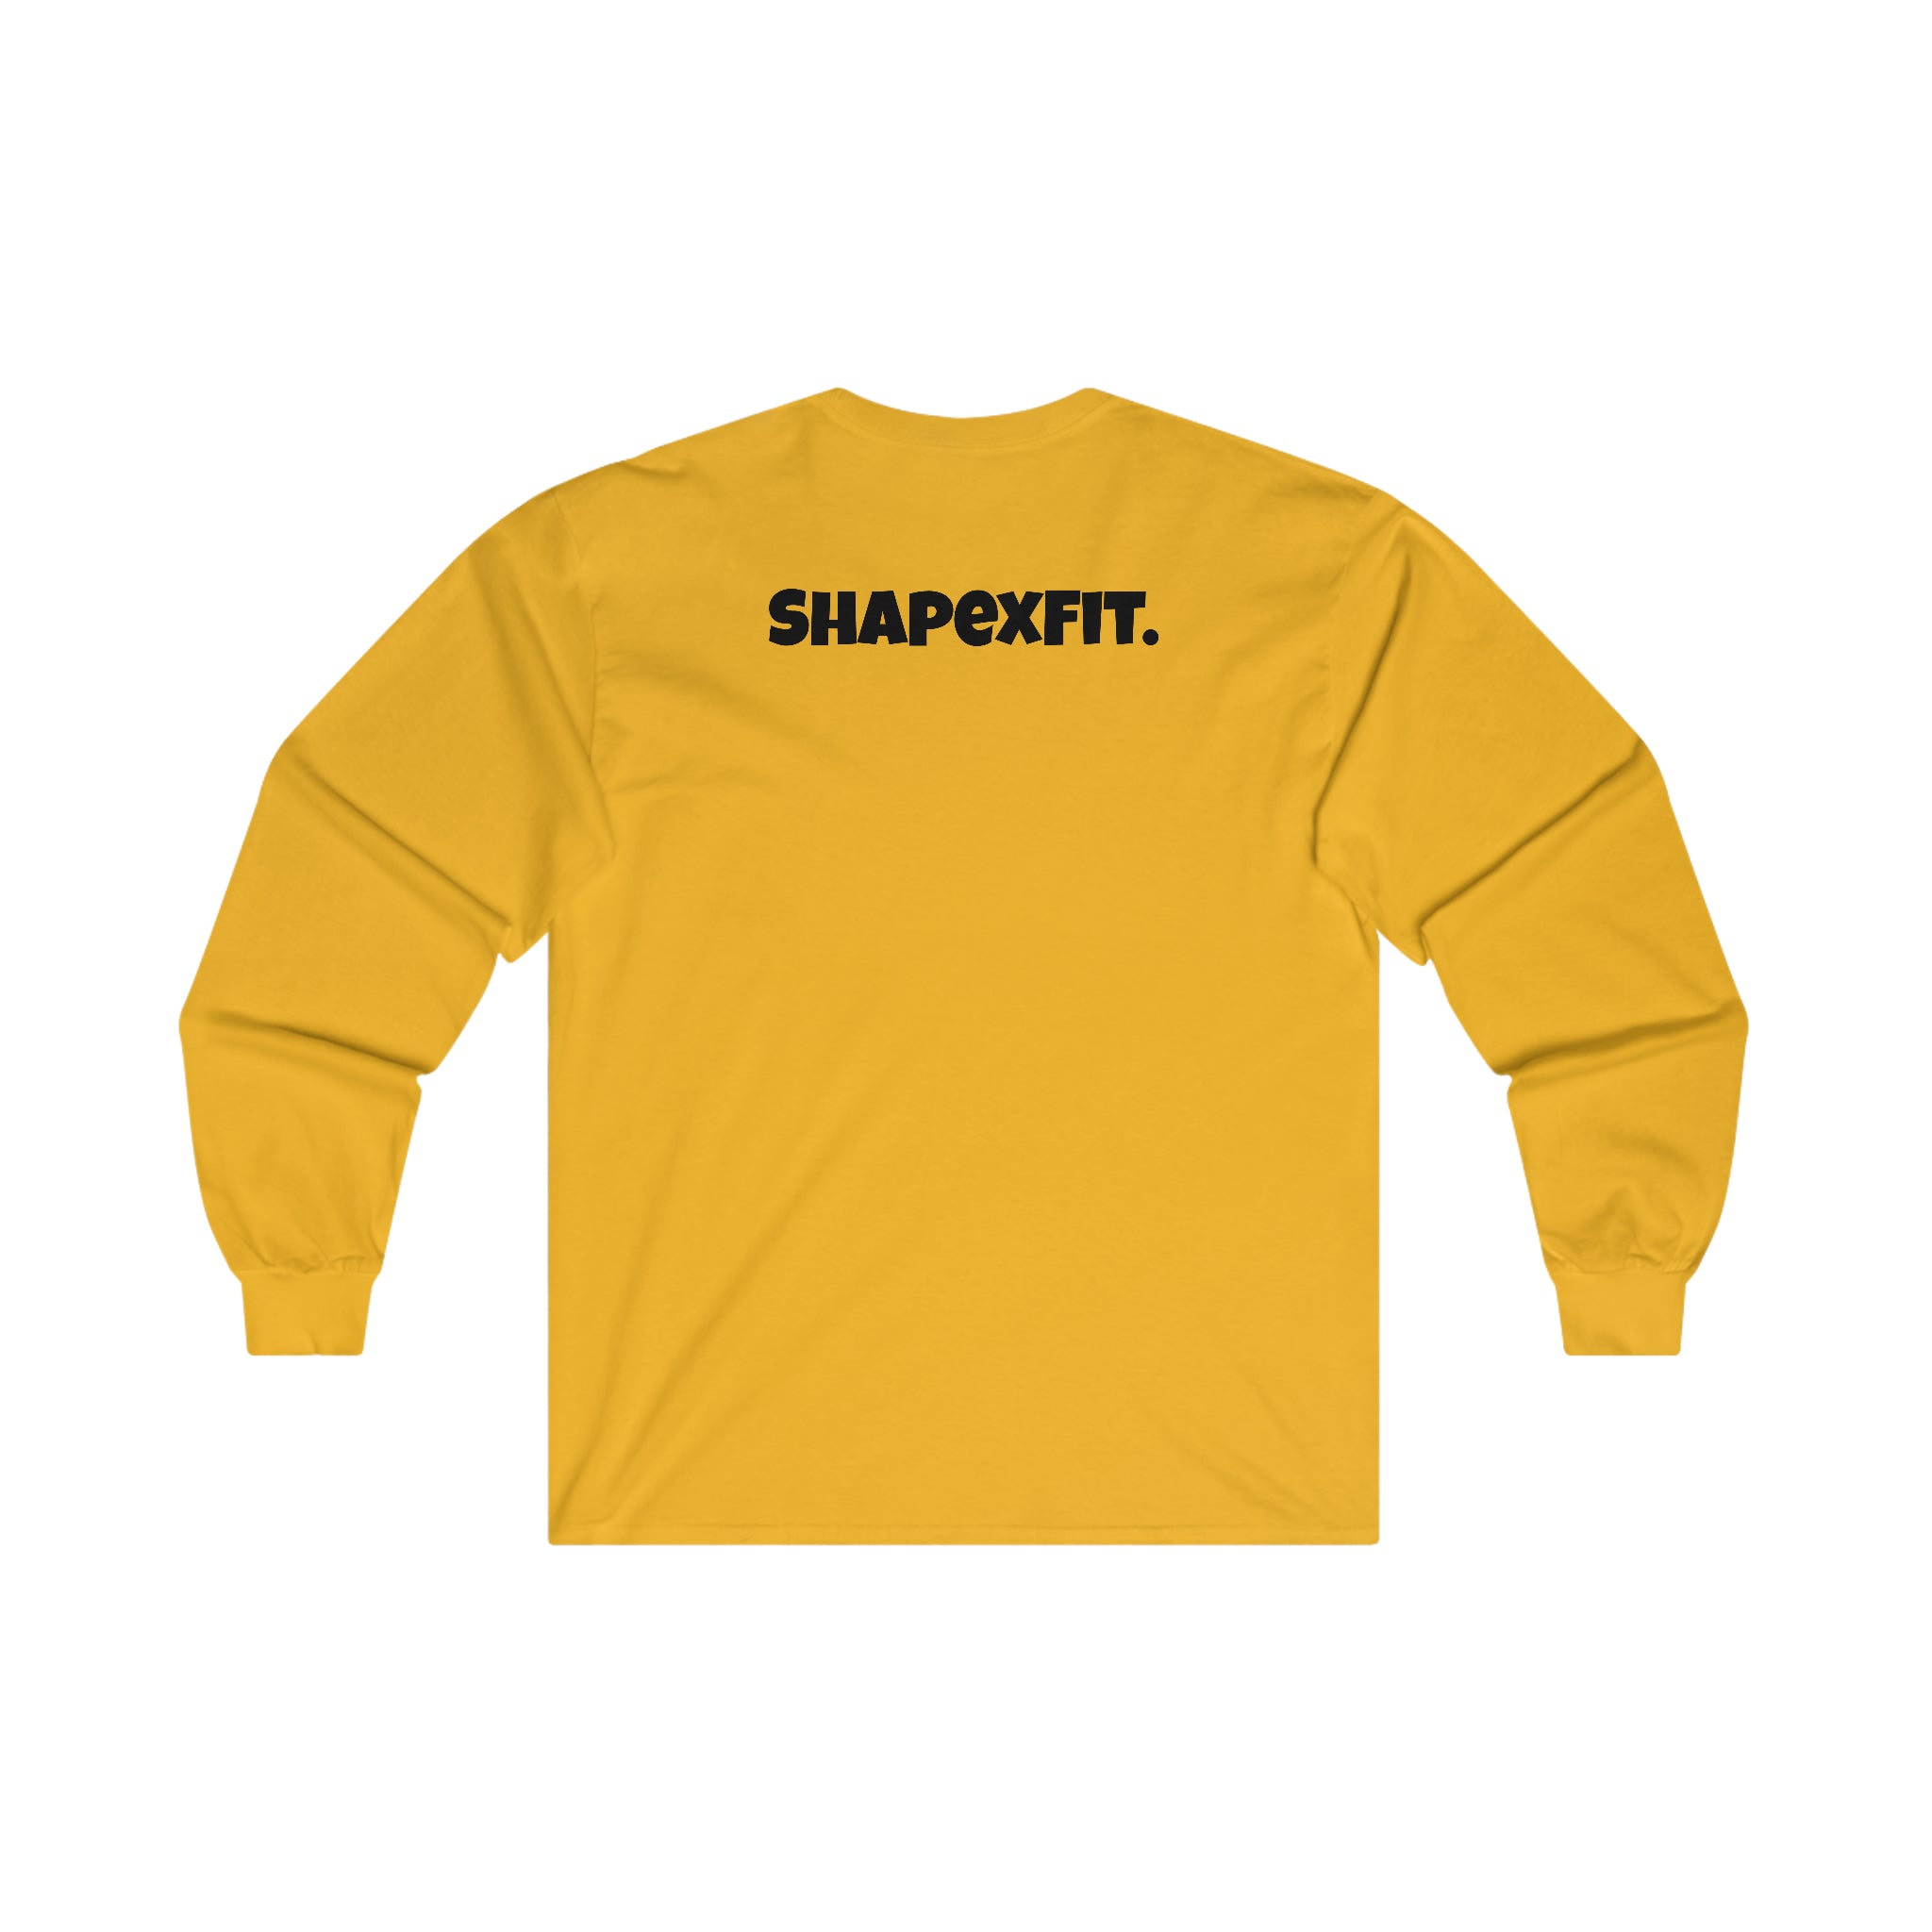 No Rest Day Long Sleeve Tee